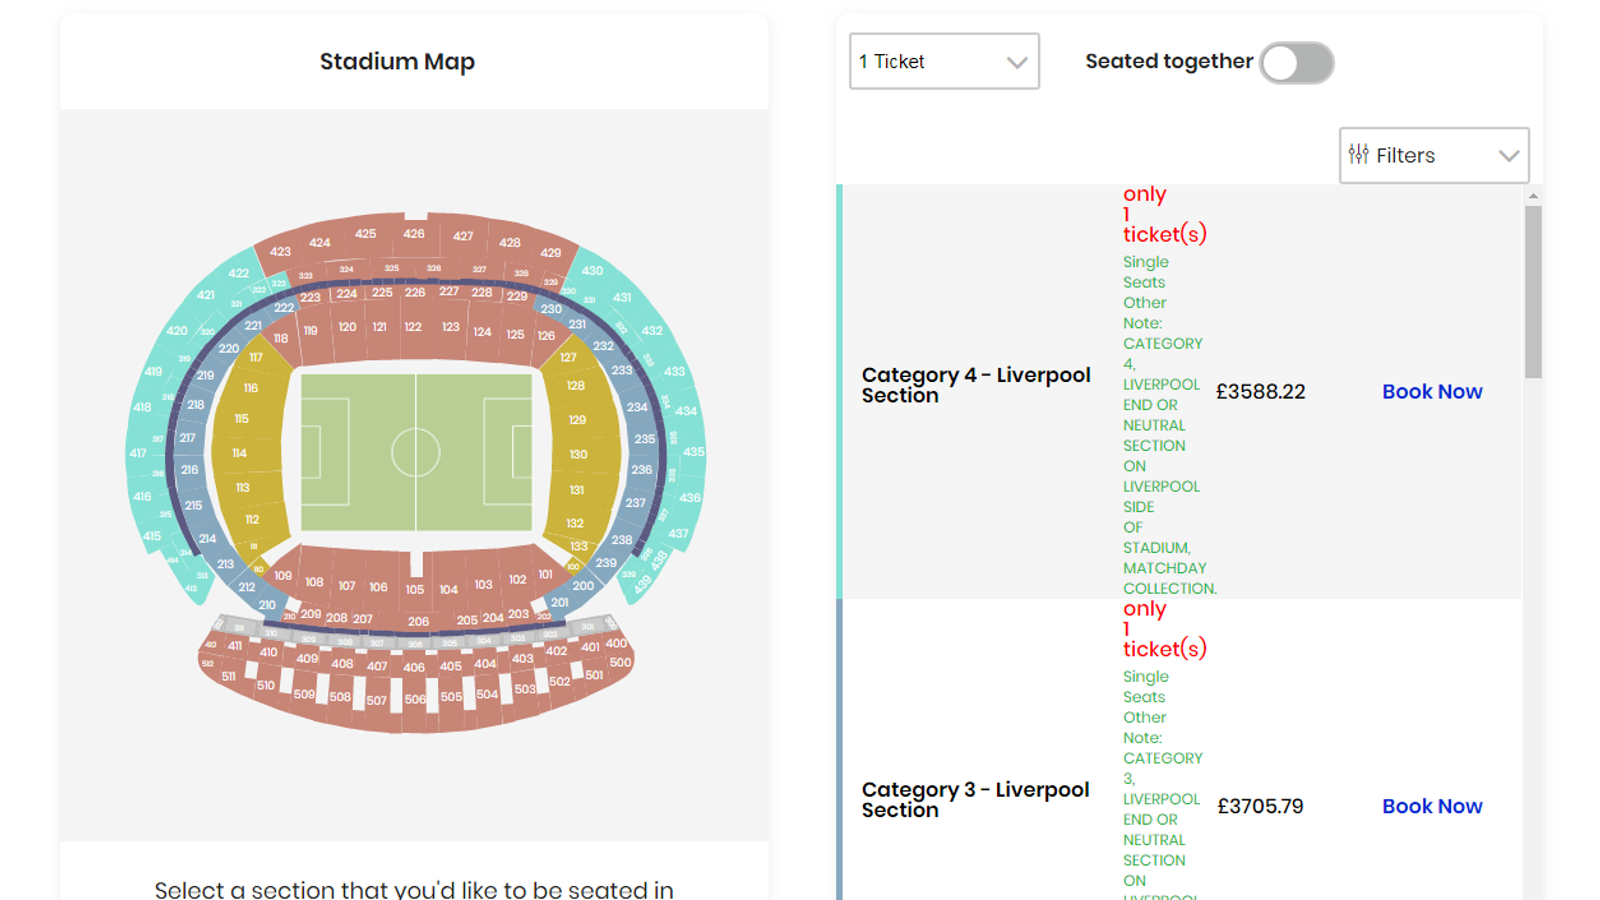 Champions League final tickets could cost Liverpool and Tottenham fans